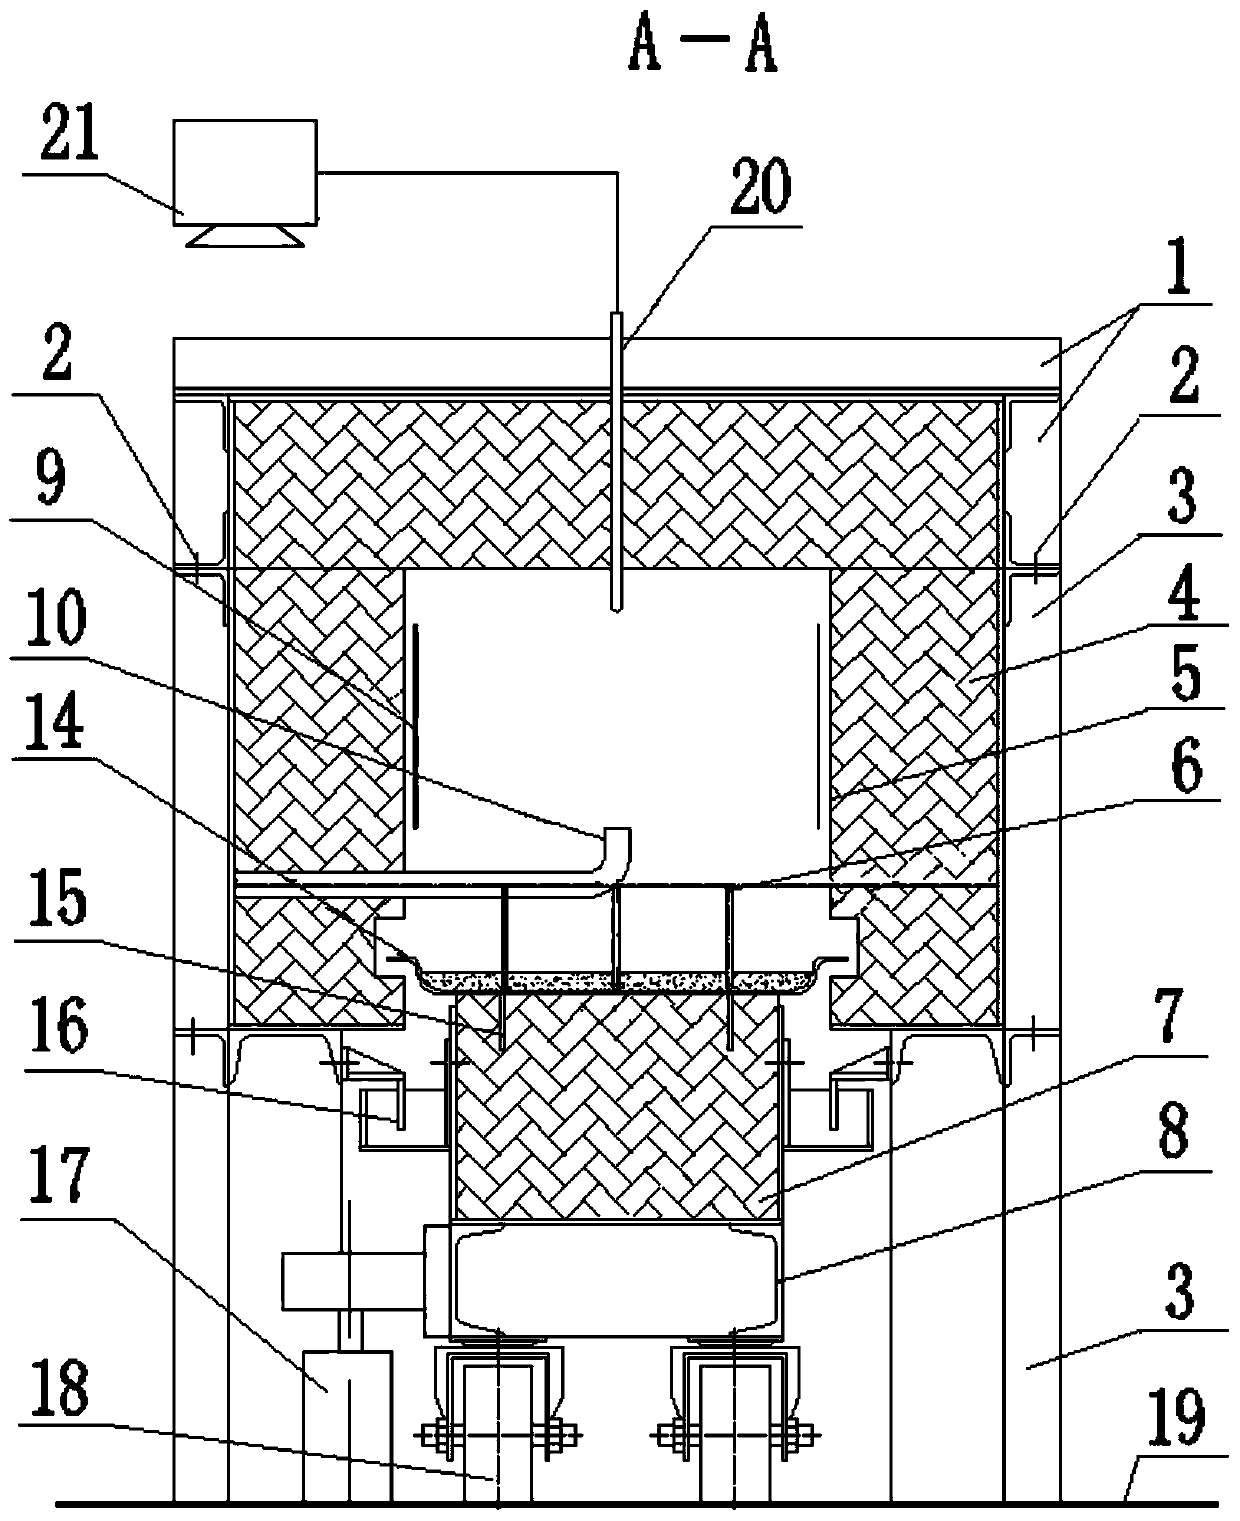 An annular fixed bed combustion furnace applied to powder materials